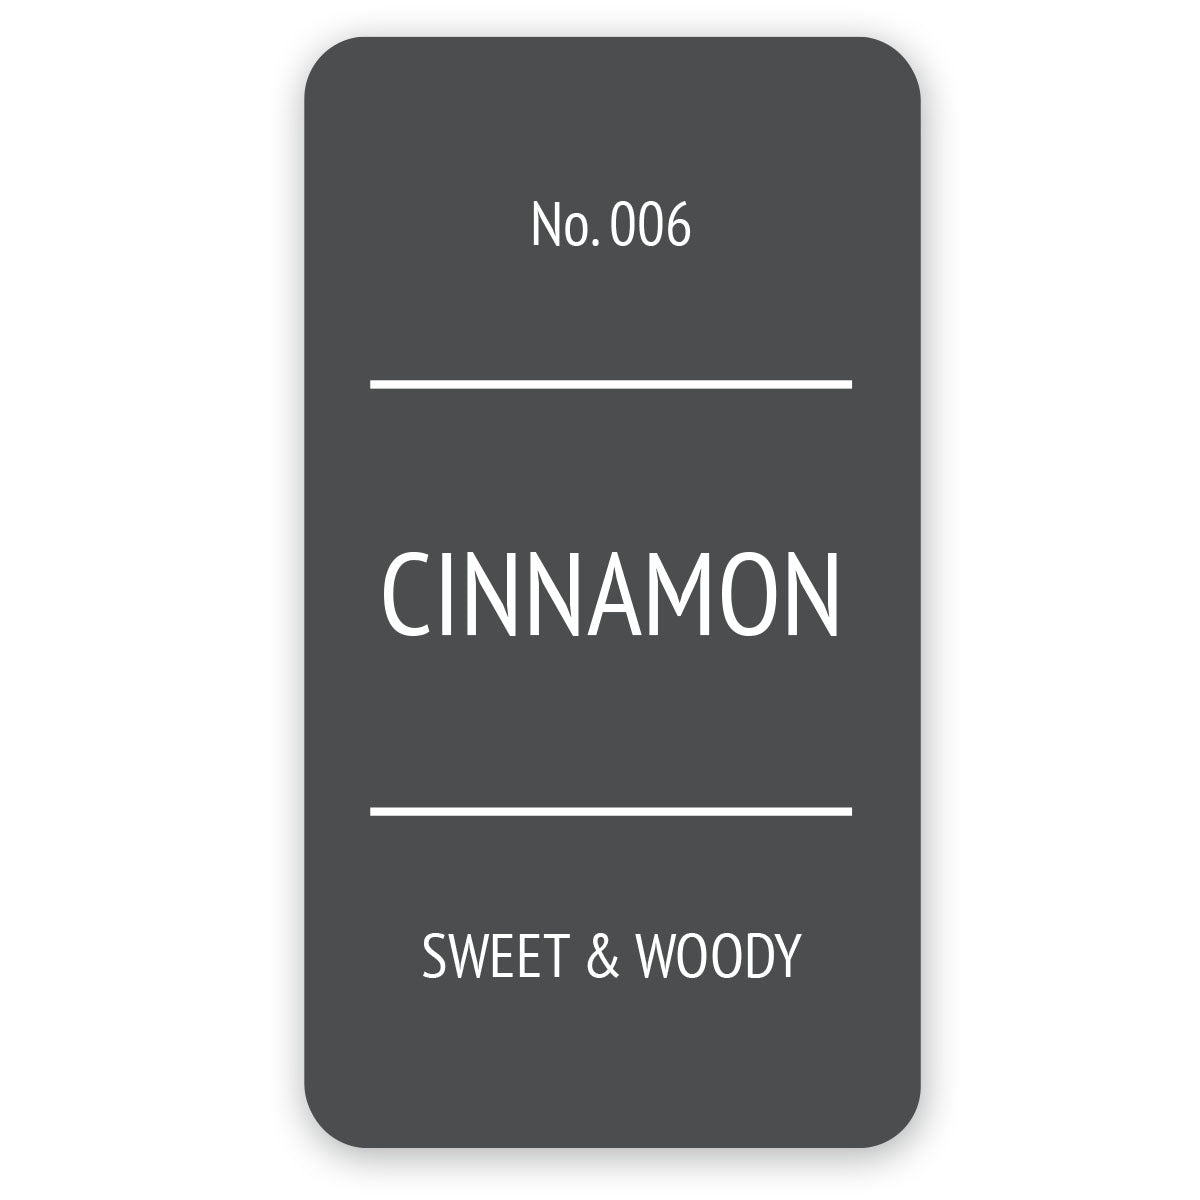 Modern Spice Jar Labels: Premium Vinyl, Grey Color Option - Stylish Design for a Contemporary and Versatile Look